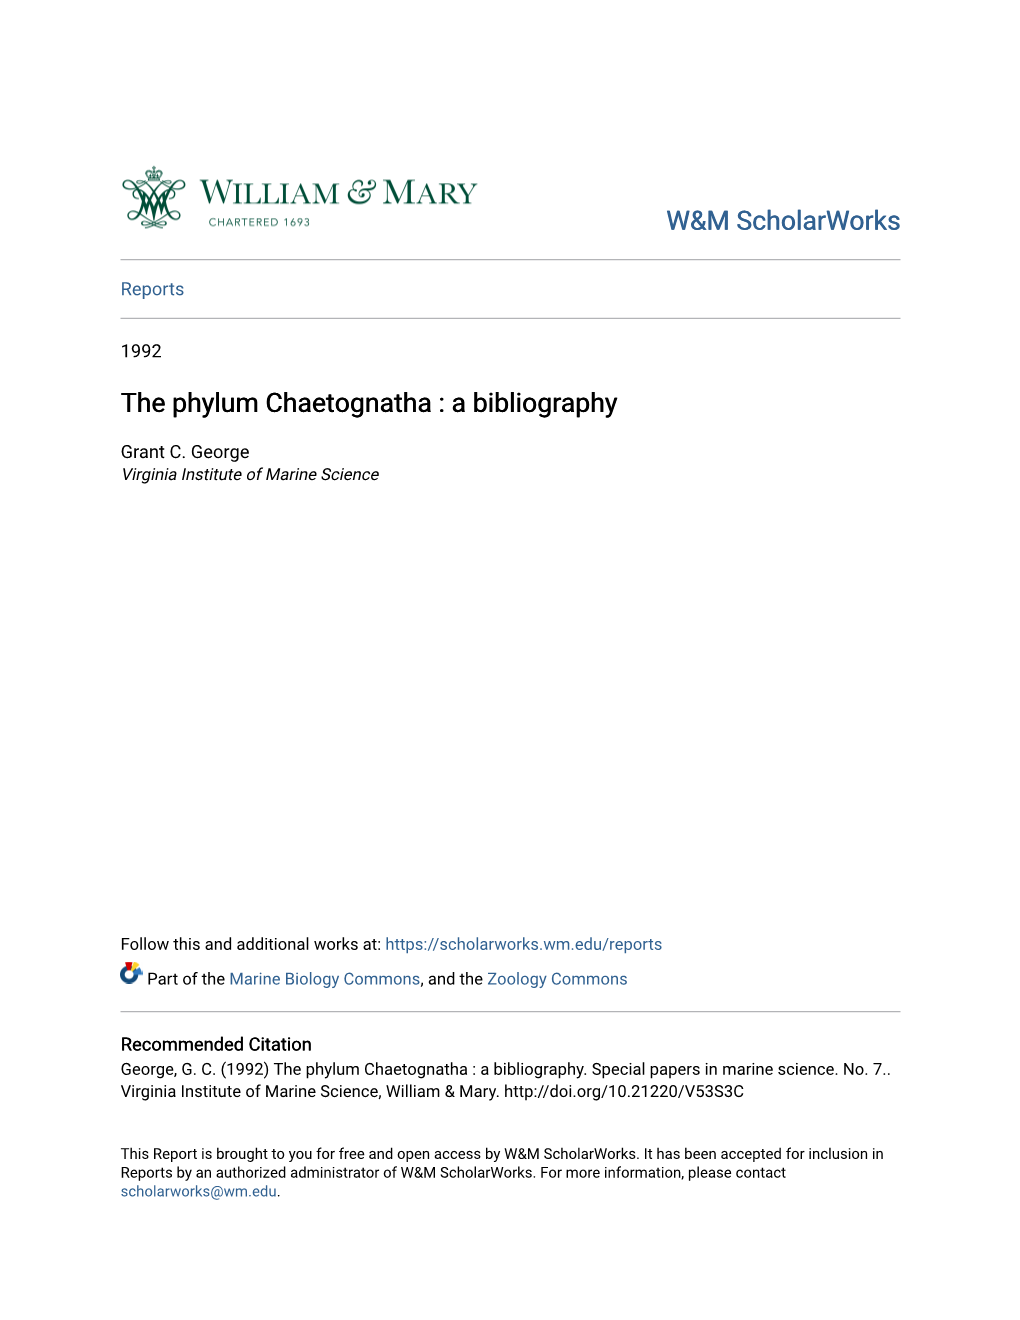 The Phylum Chaetognatha : a Bibliography